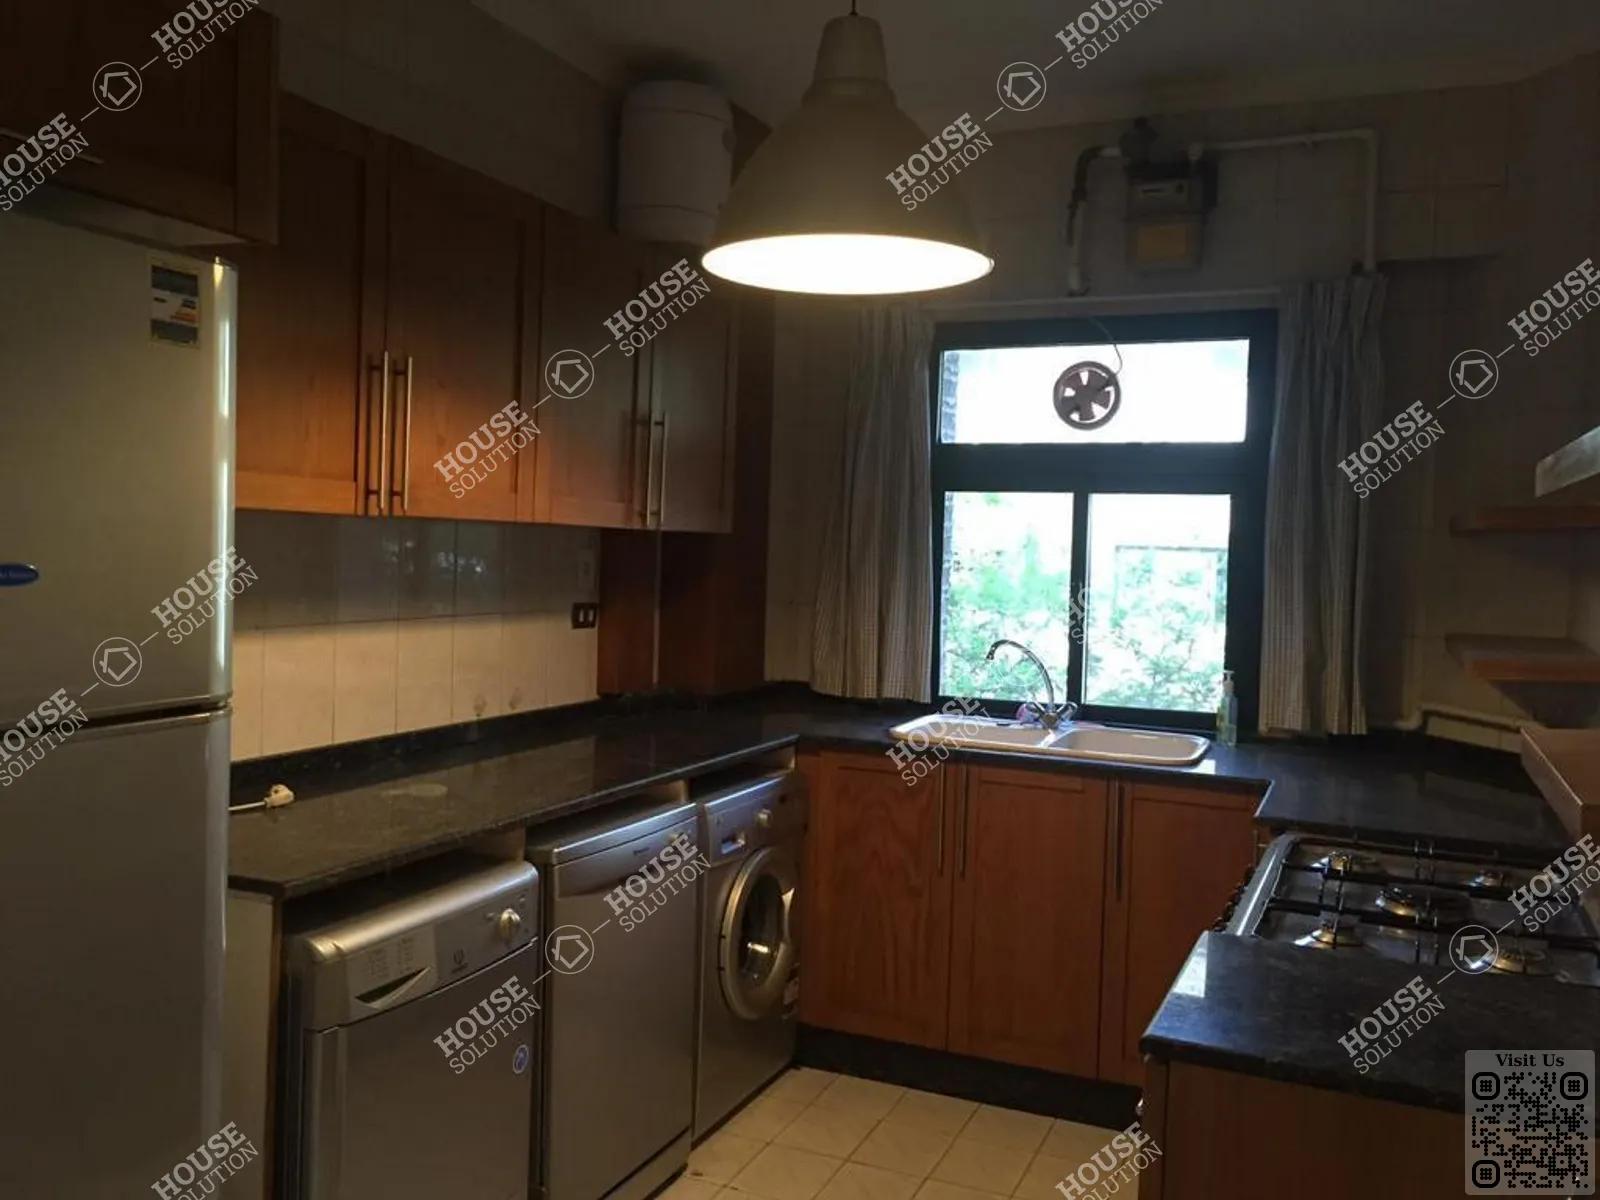 KITCHEN  @ Apartments For Rent In Maadi Maadi Sarayat Area: 165 m² consists of 3 Bedrooms 2 Bathrooms Modern furnished 5 stars #5858-2